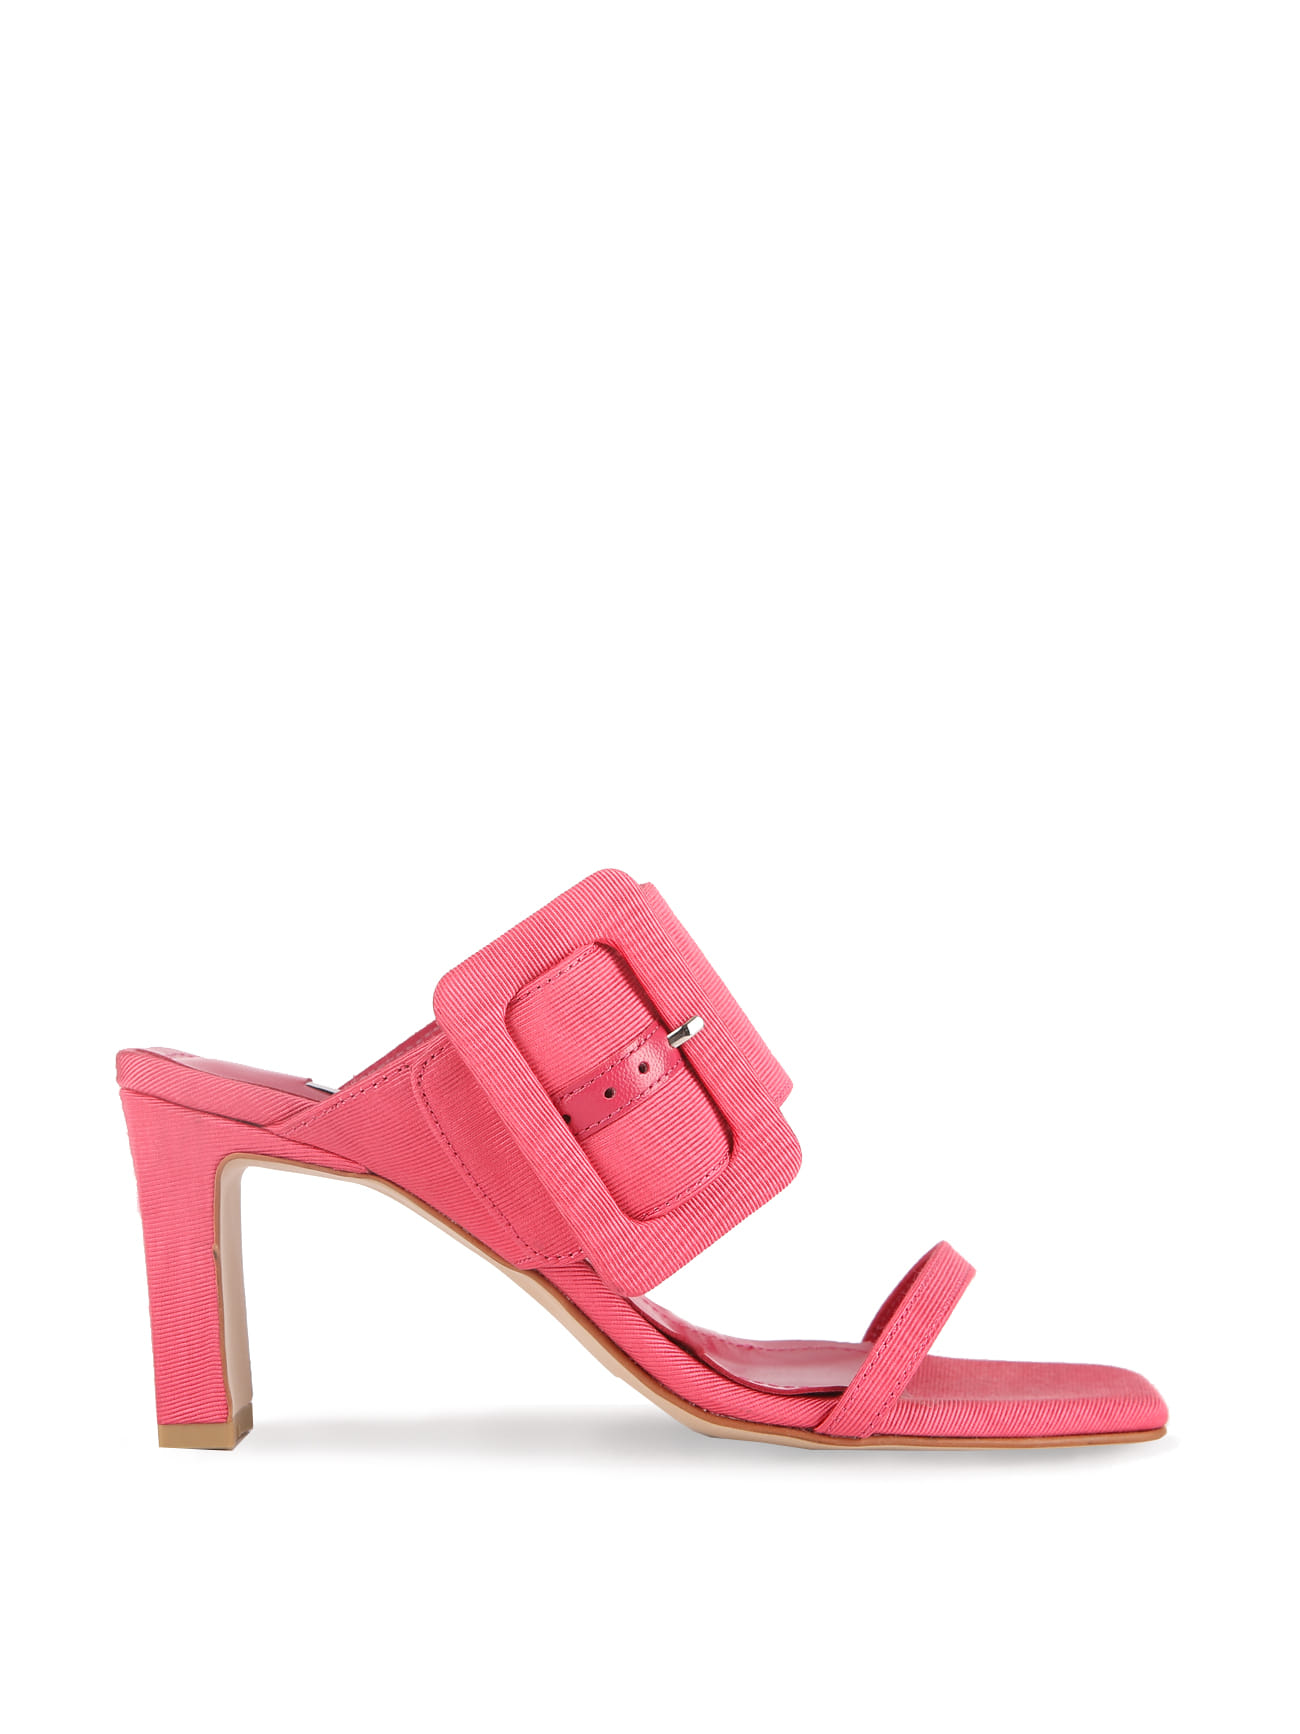 TWIGGY Buckle Mule - Pink Cotton (235사이즈 7cm)